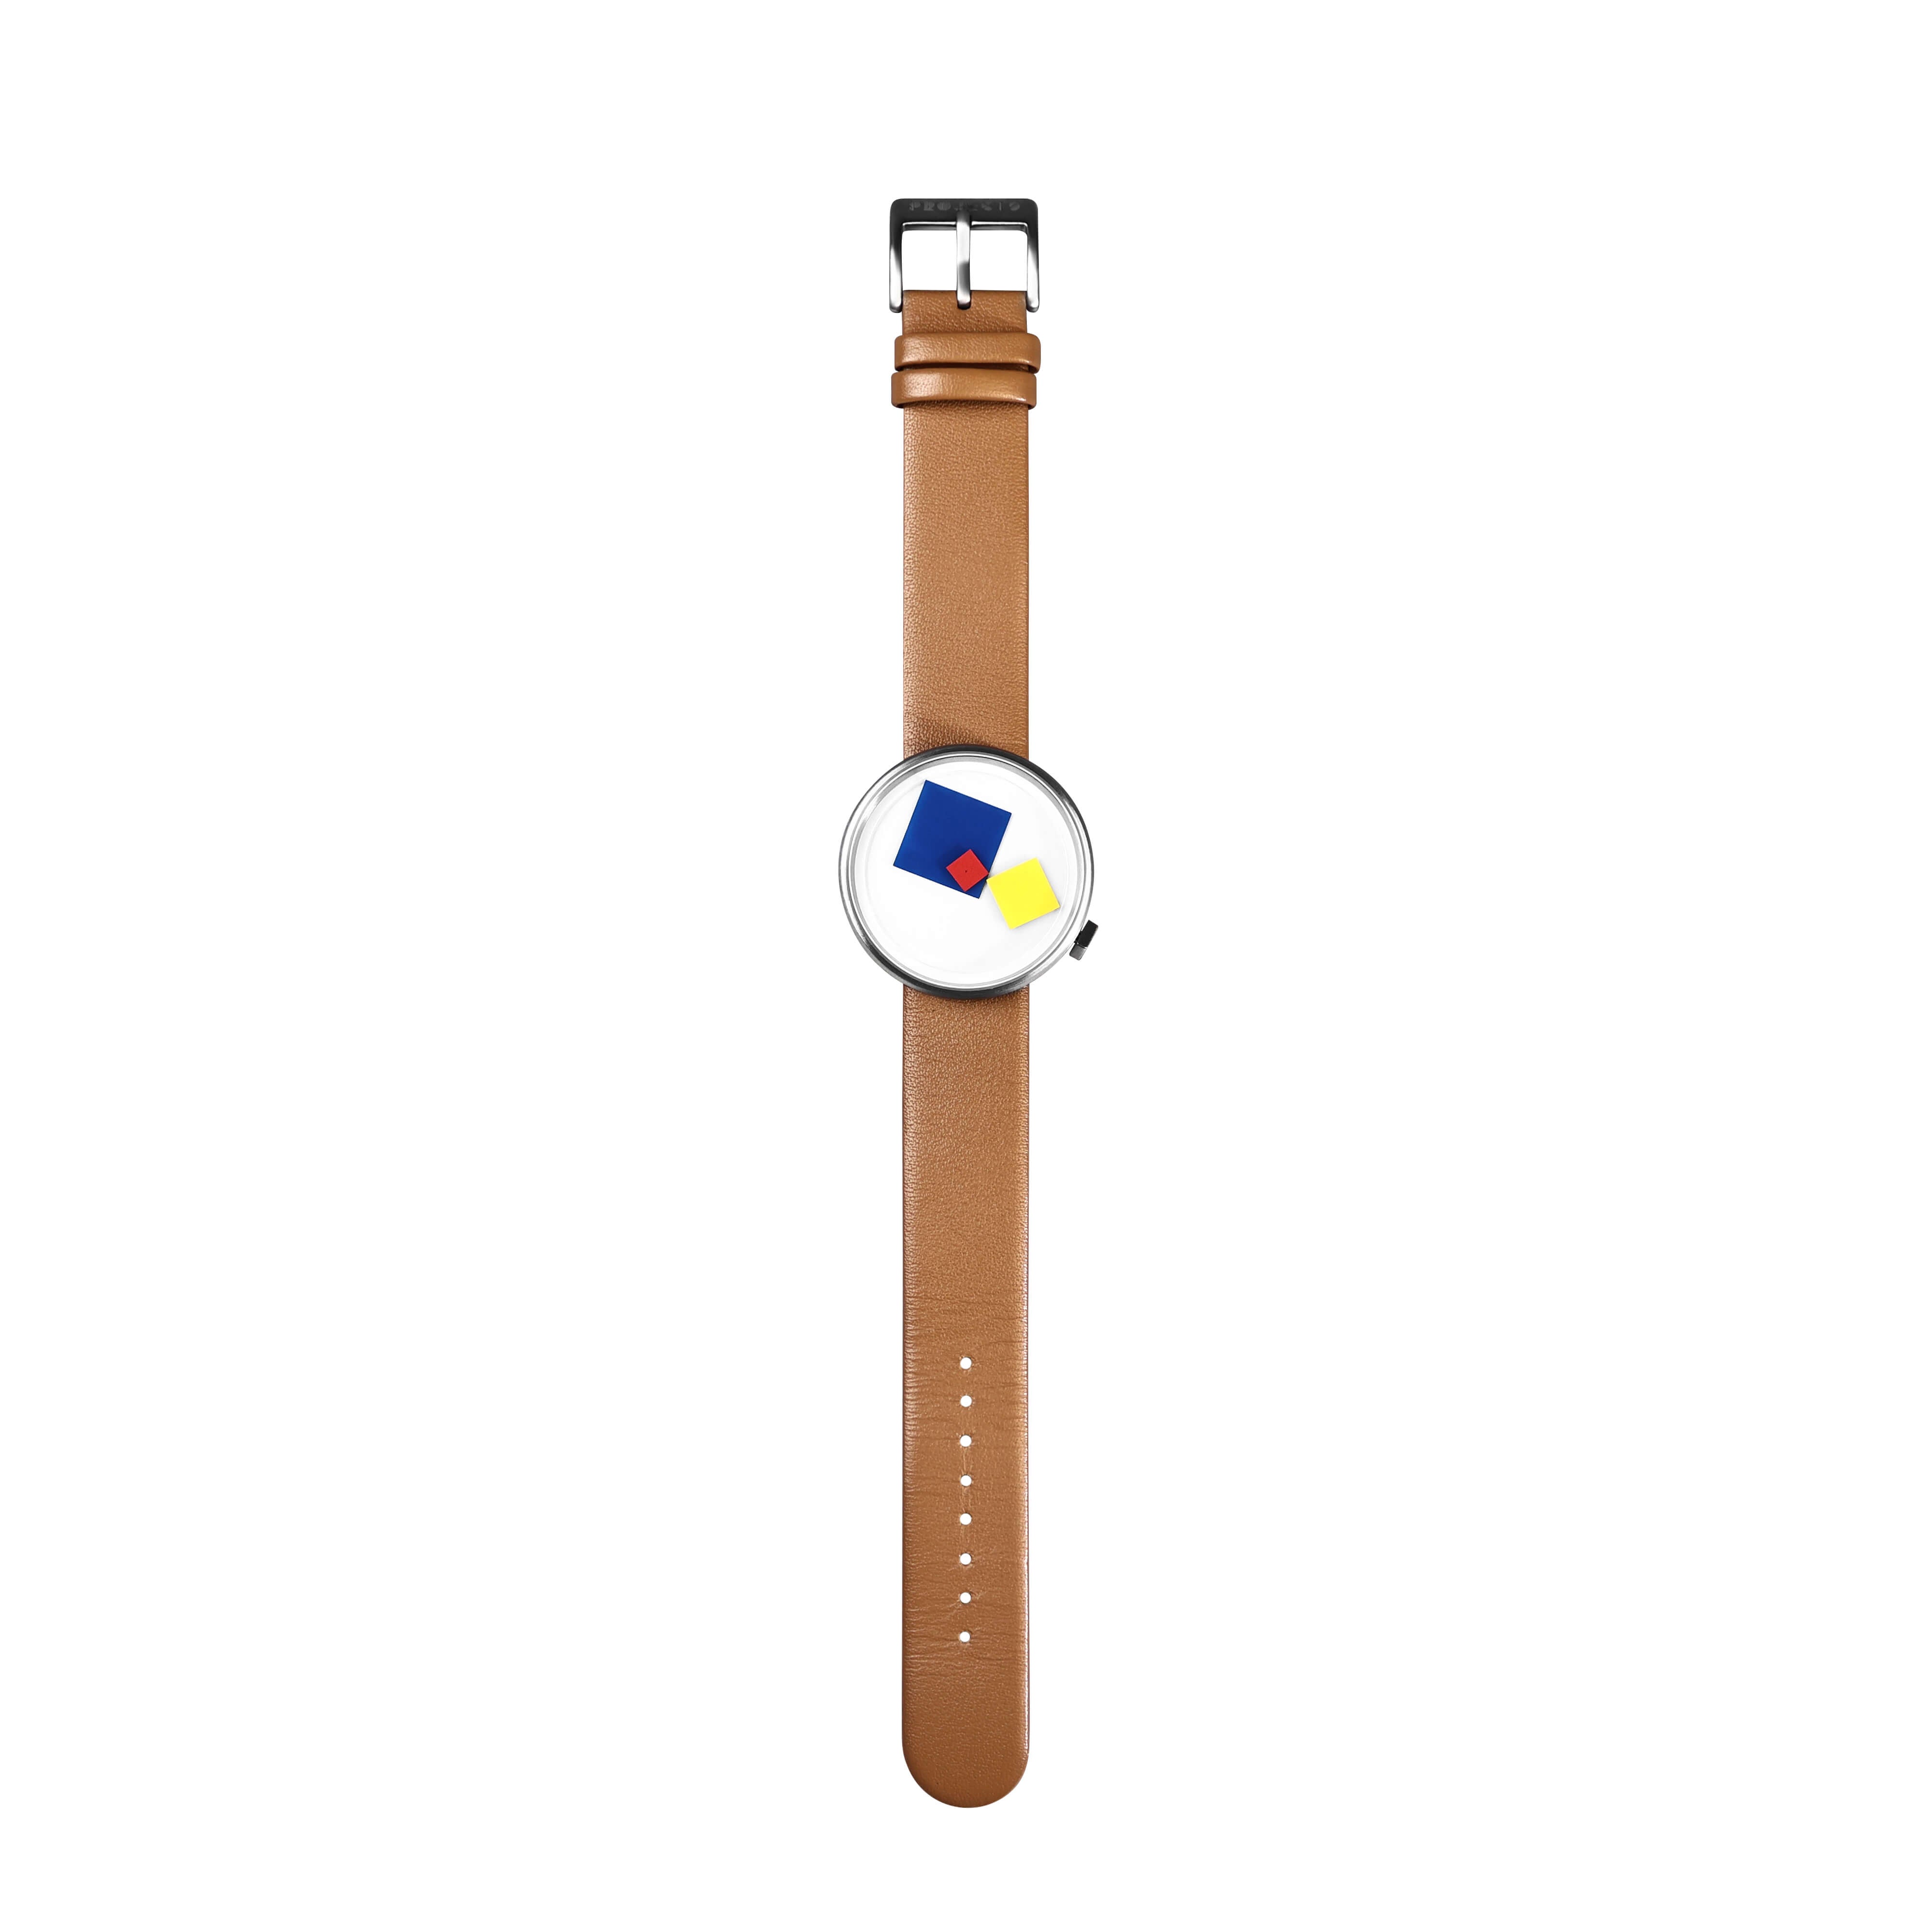 New Brown square shape simple and professional women Watch 21st century  Brown Leather strap Analog Watch -